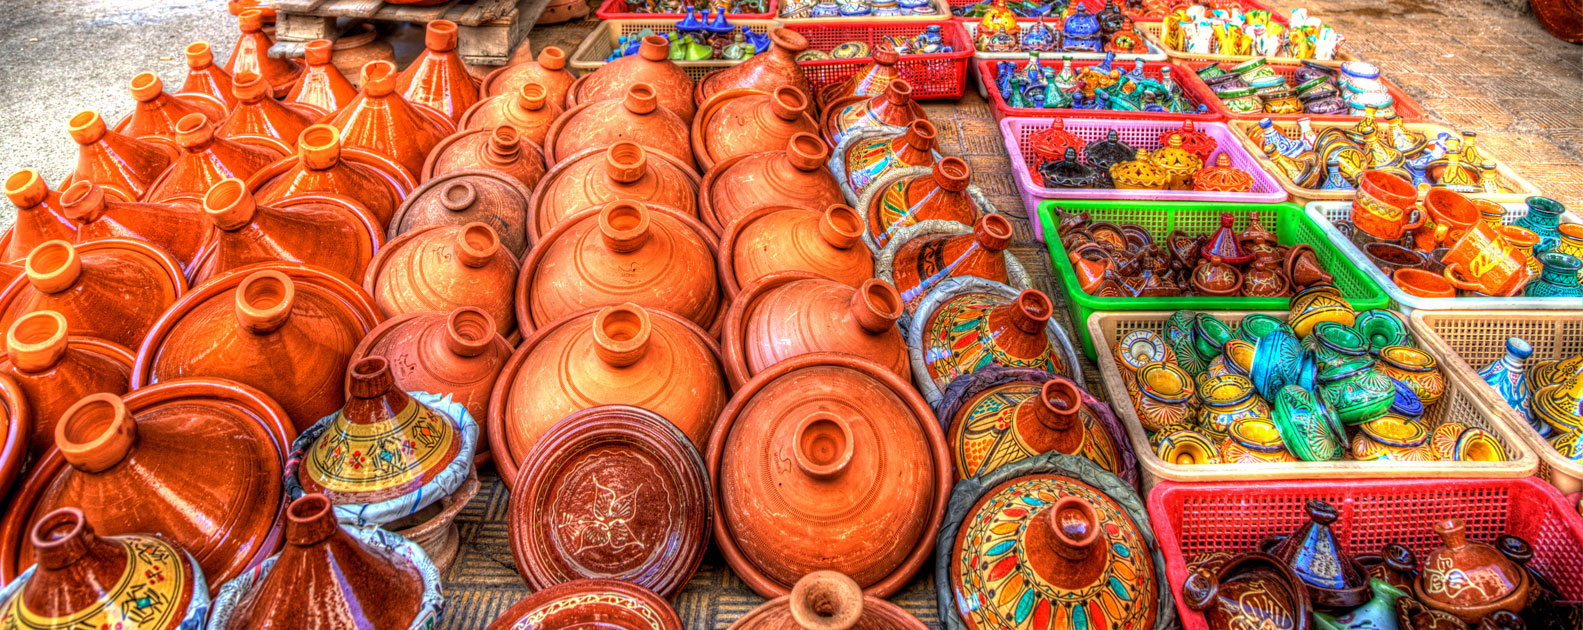 Safi, stroll in the city of pottery